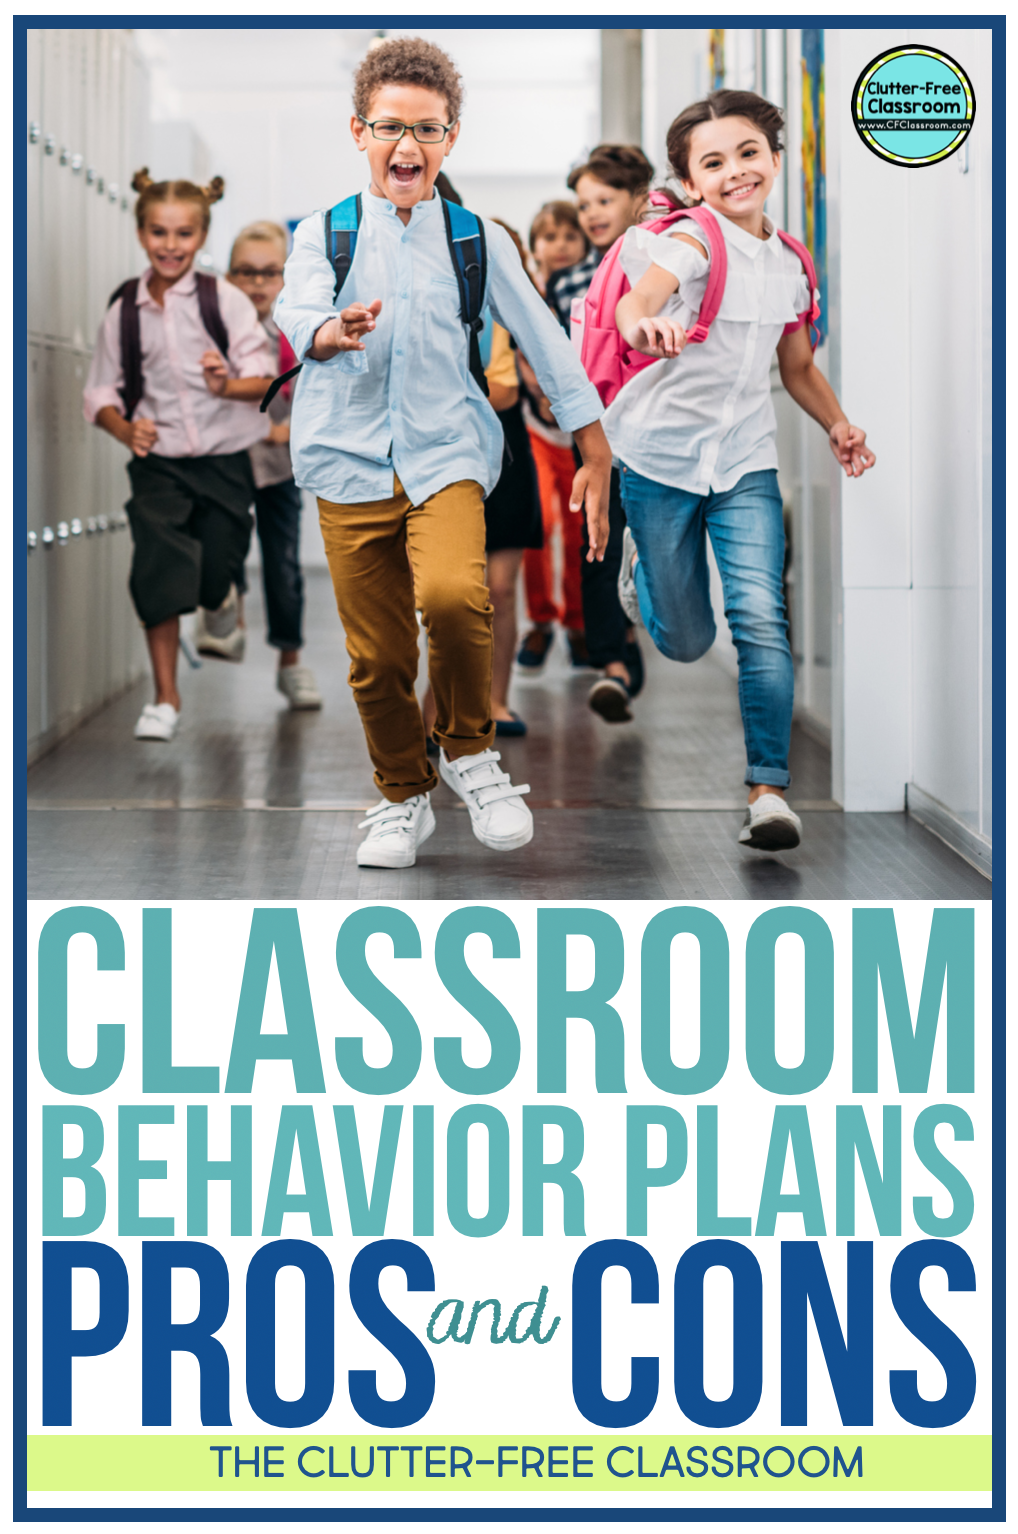 Learn how to improve classroom behavior using clip charts. This behavior and classroom management system only requires clothespins and these printables from the Clutter Free Classroom. Celebrate, track, and display positive individual behavior using these strategies, techniques, and ideas.